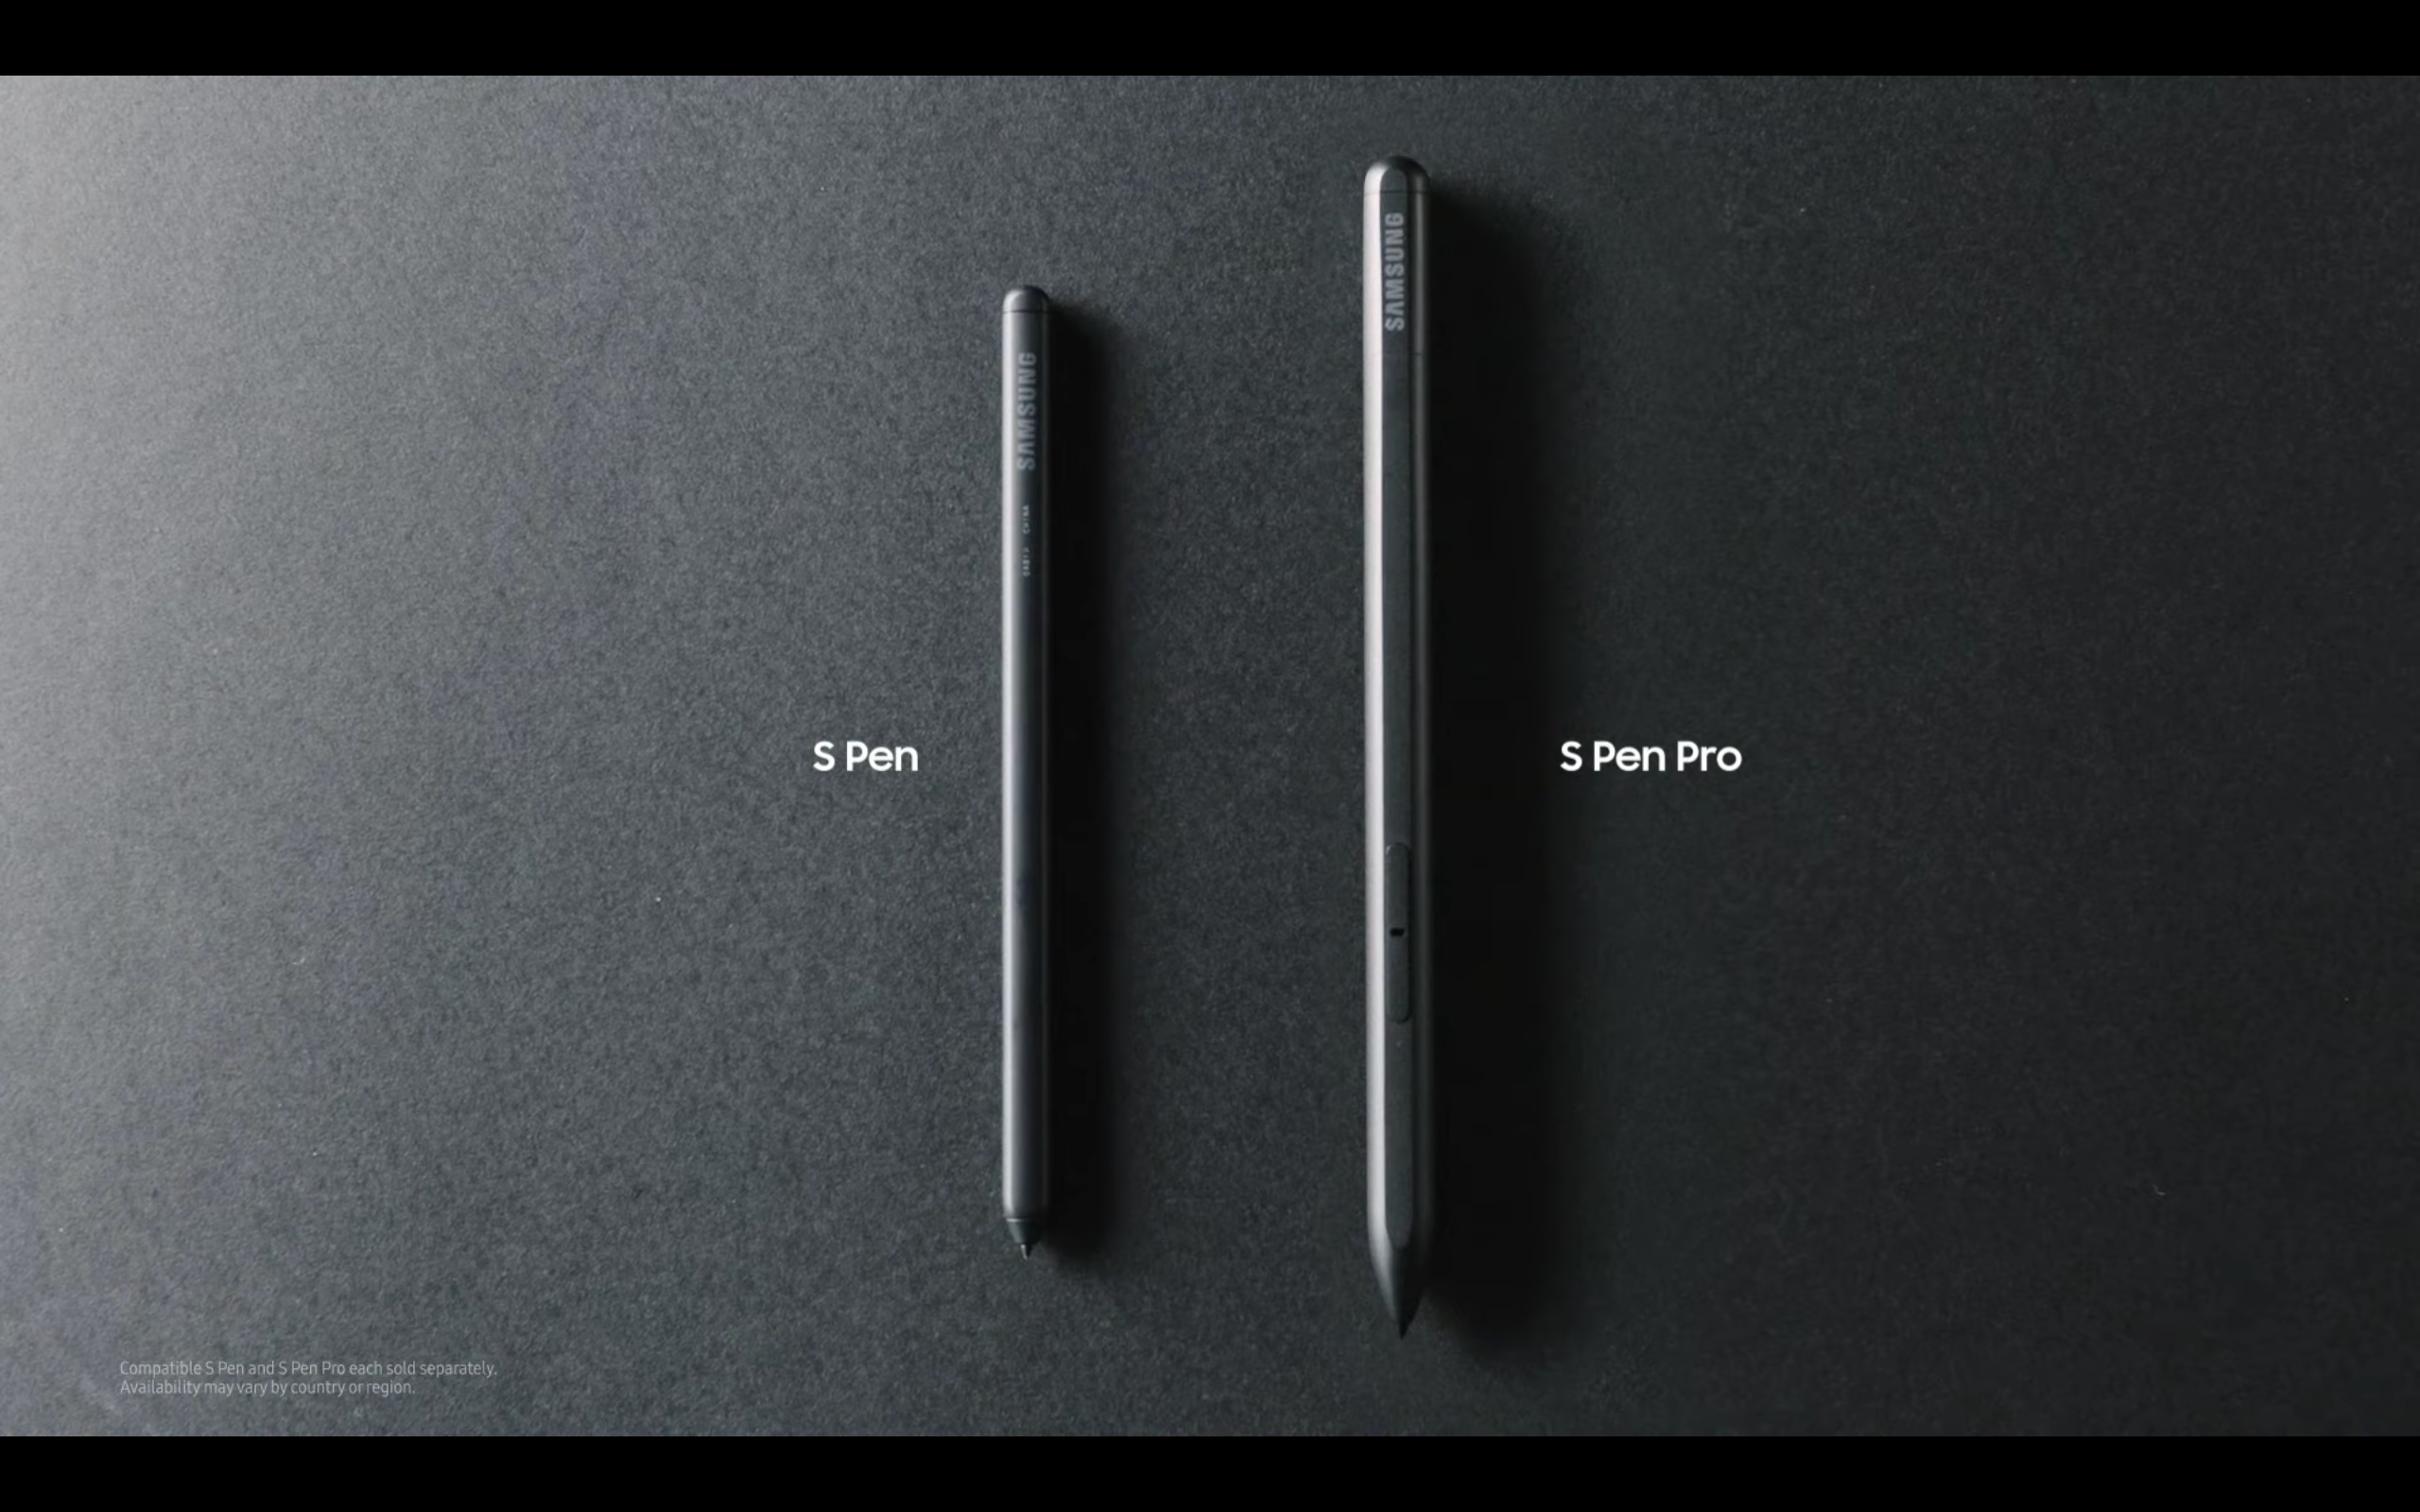 Samsung S Pen Pro is a pencil-sized stylus for the S21 Ultra